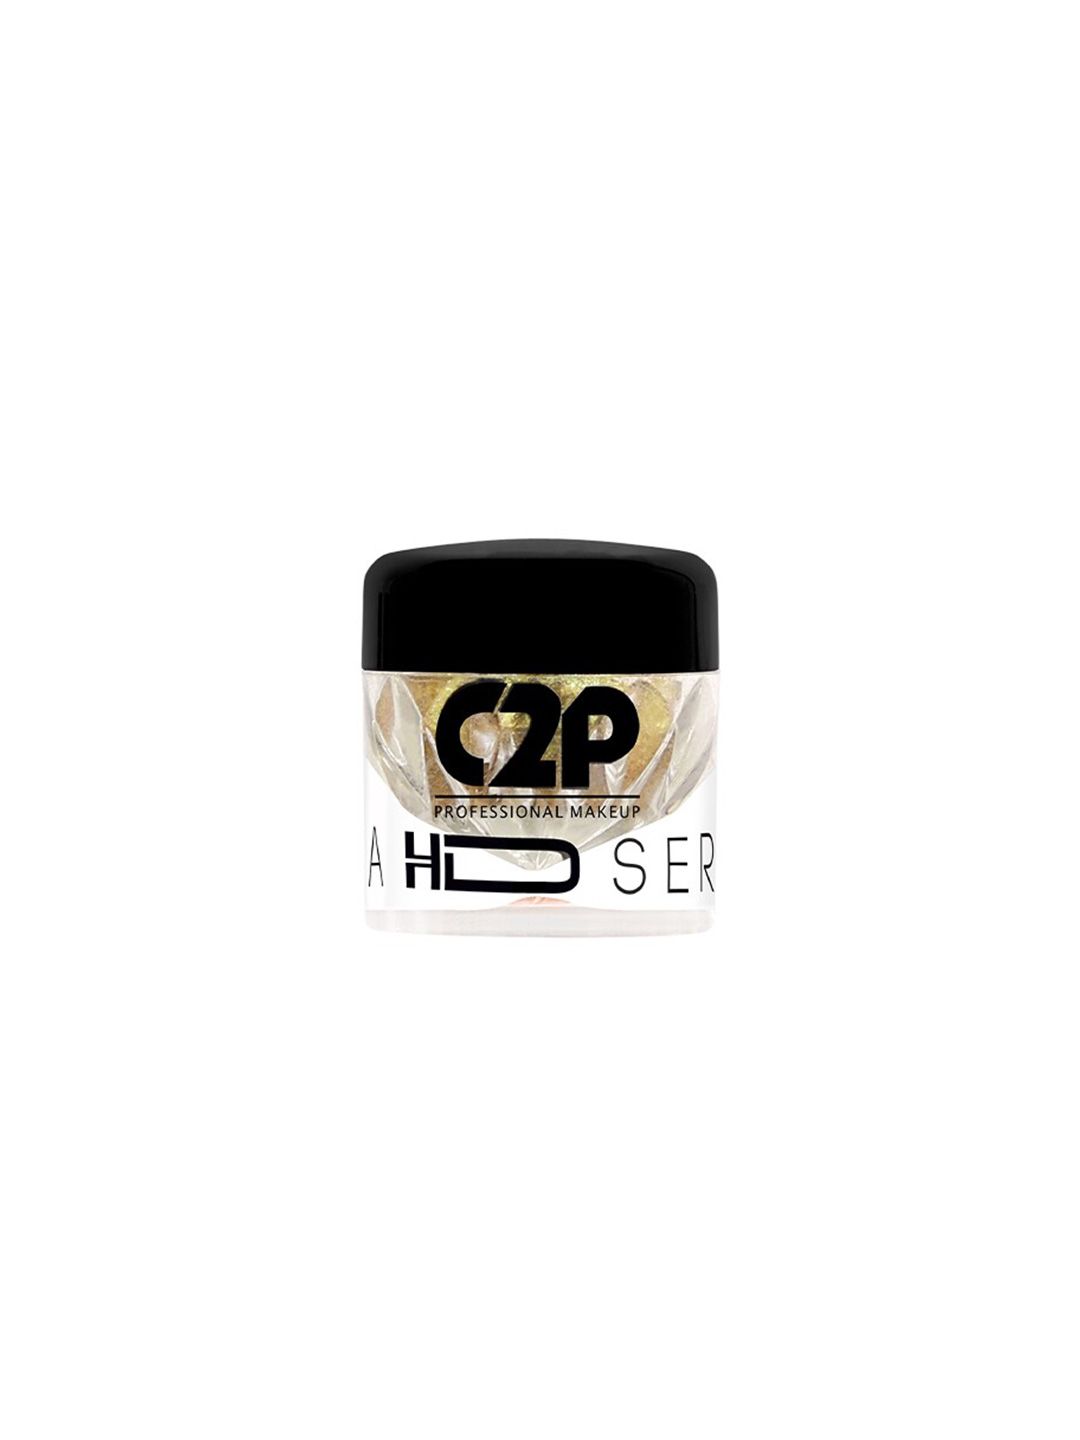 C2P PROFESSIONAL MAKEUP HD Loose Precious Pigments - Fancy Gold 355 2gm Price in India